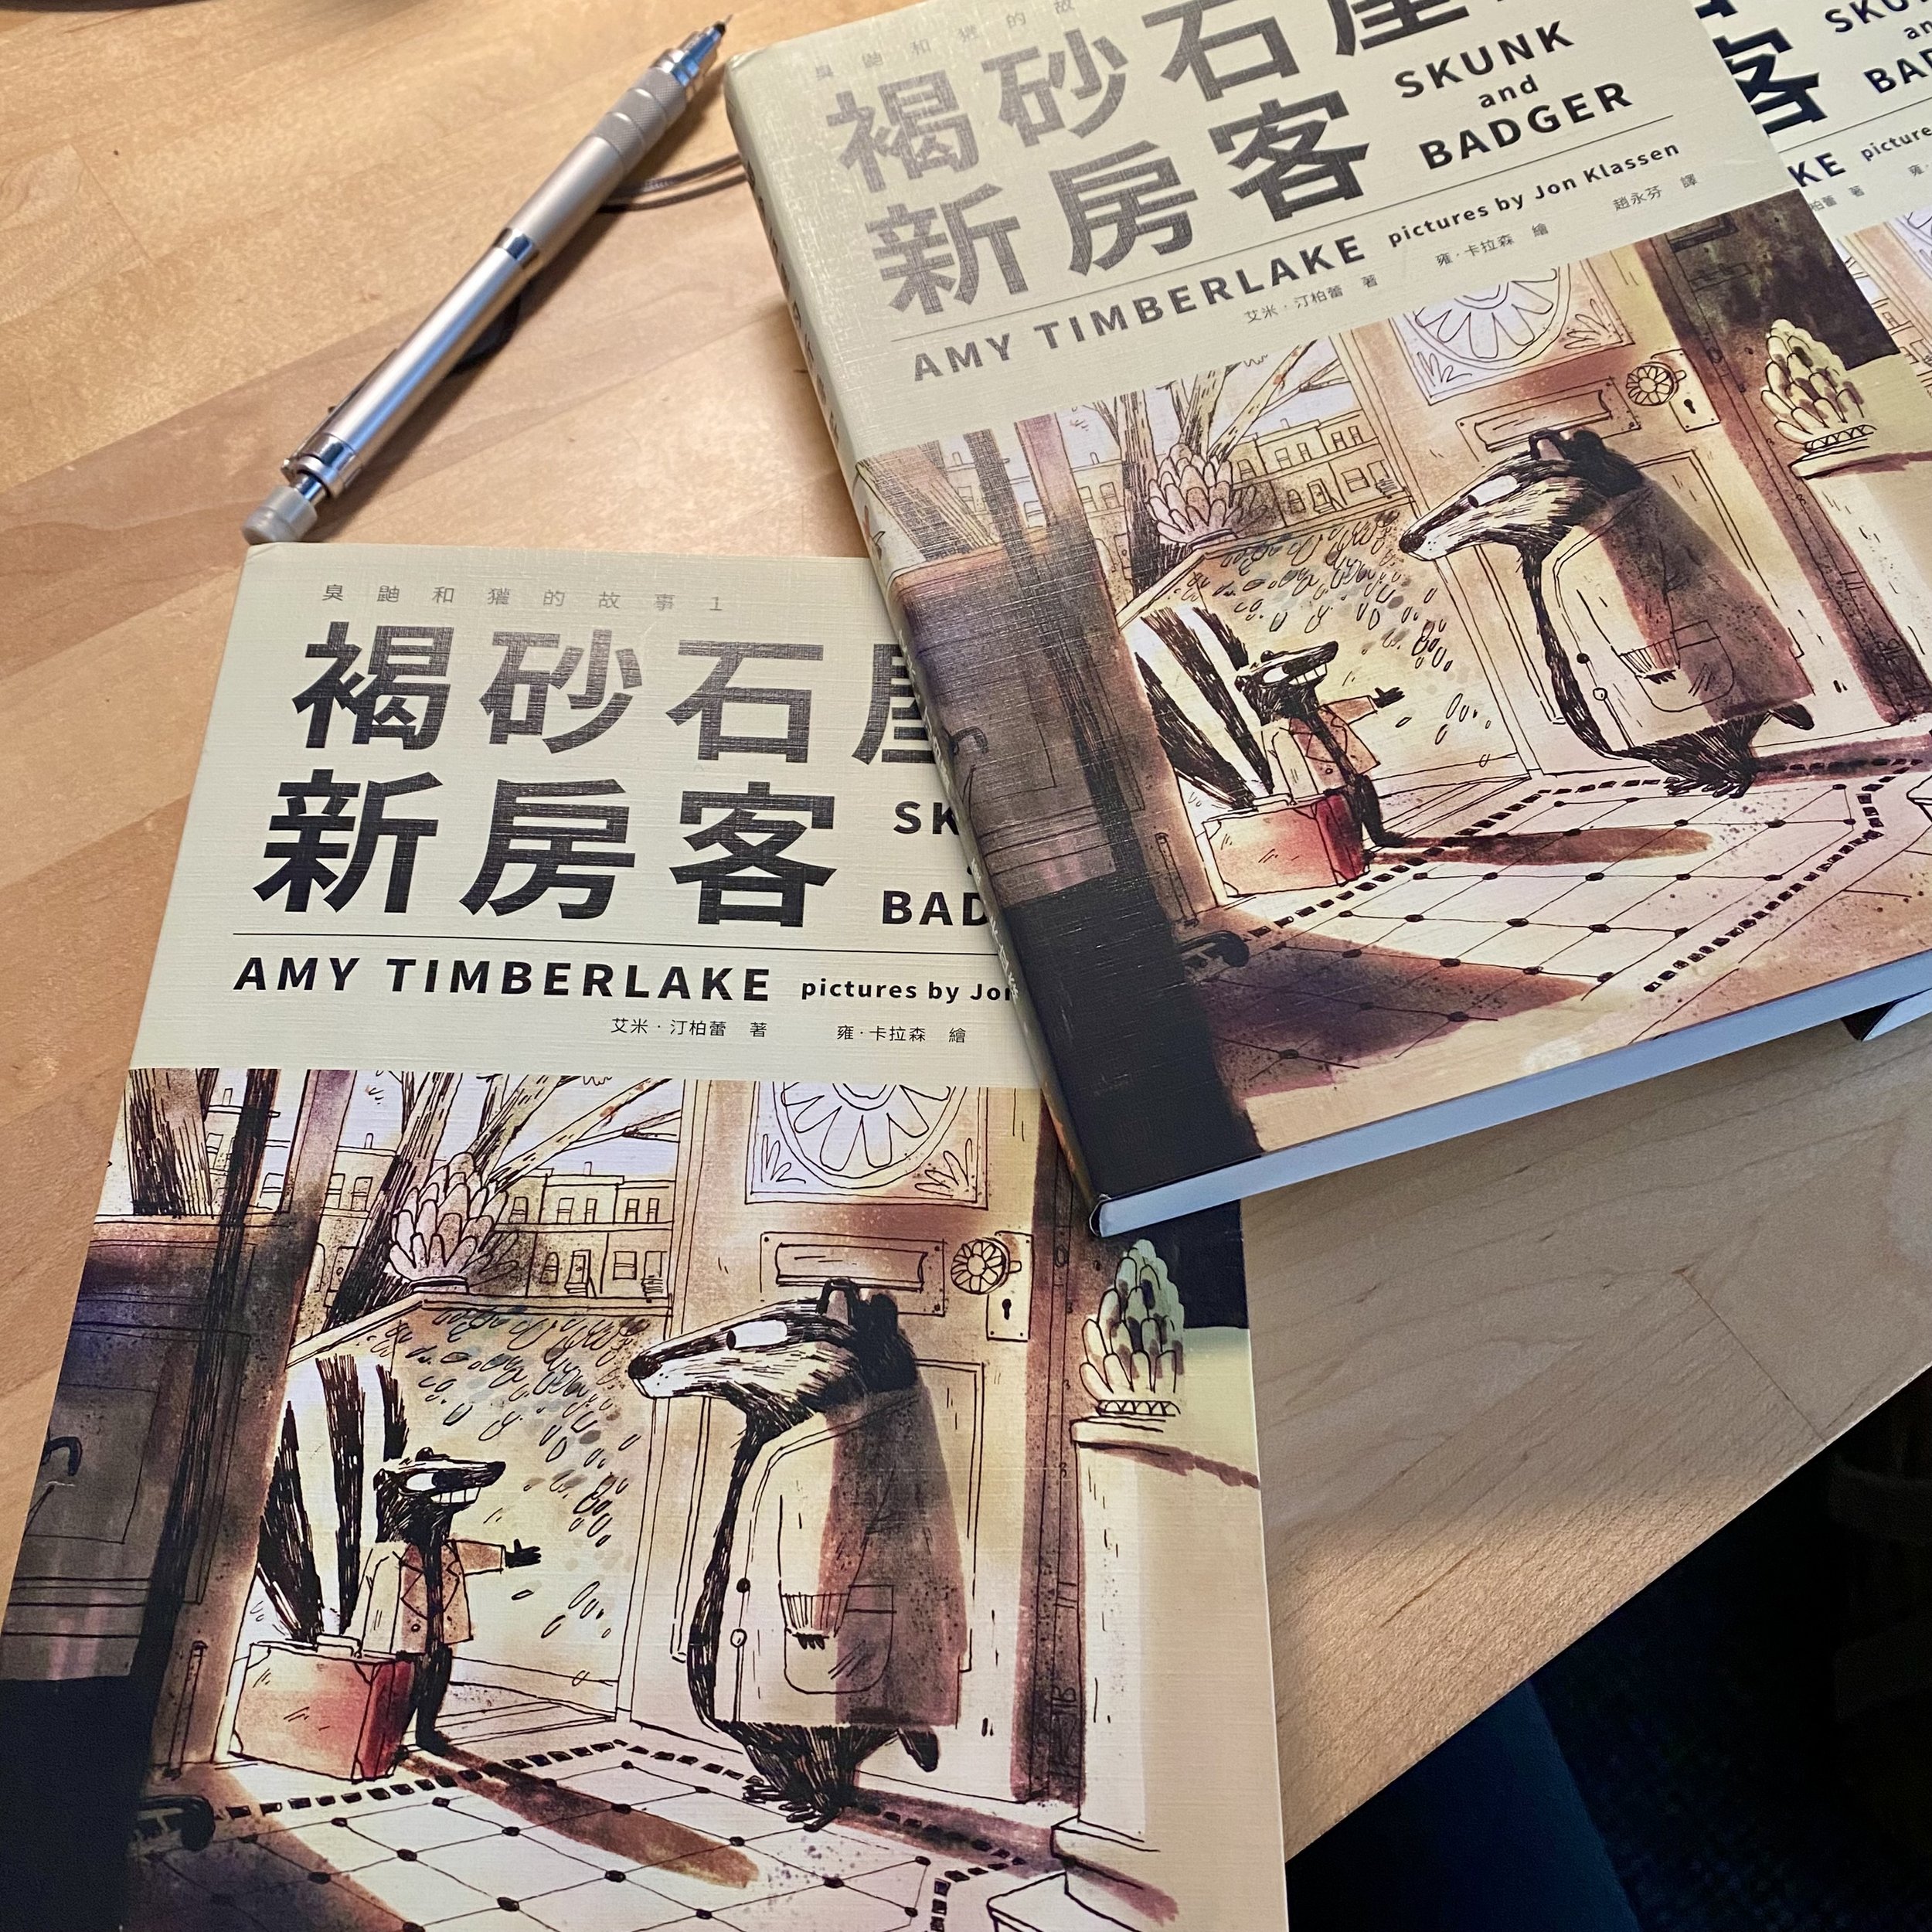 Feb 2023 -- Rye Field's SKUNK AND BADGER in Complex Chinese! Yay!